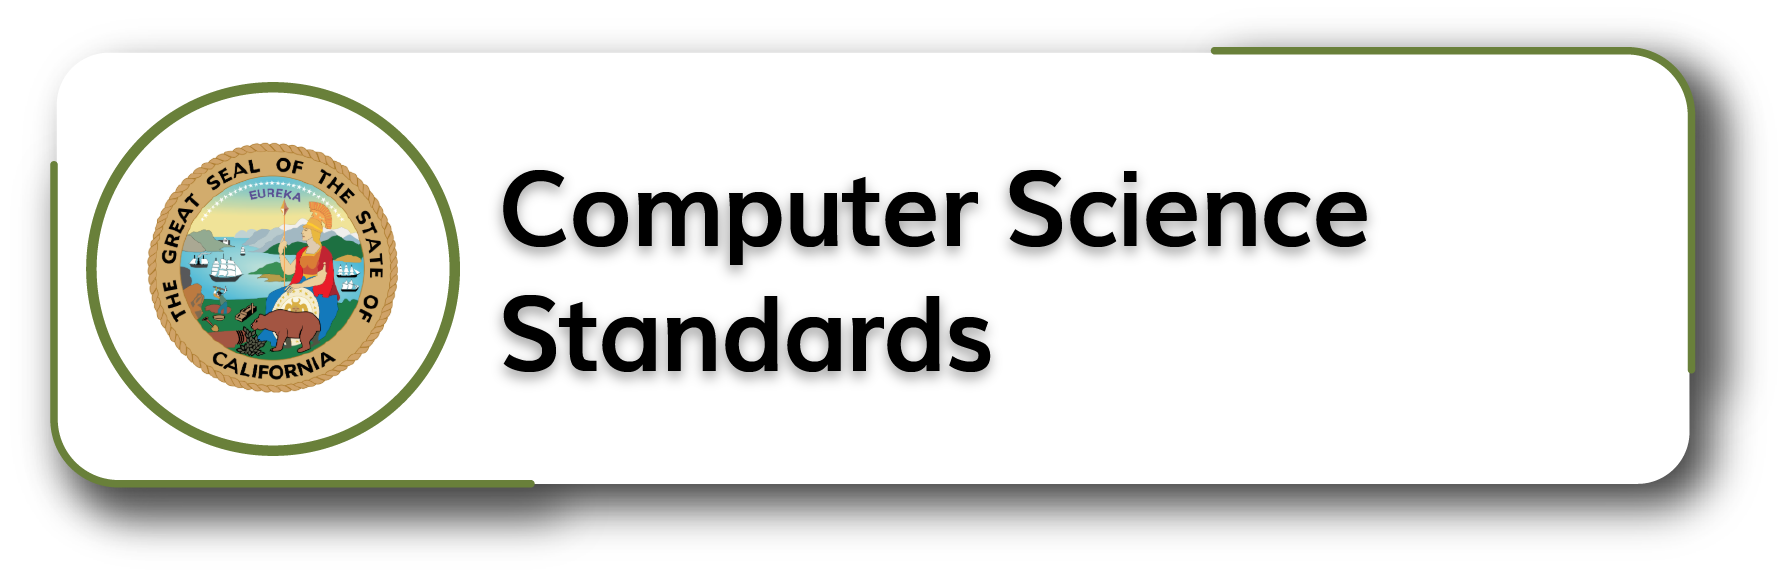 Computer Science Standards Button